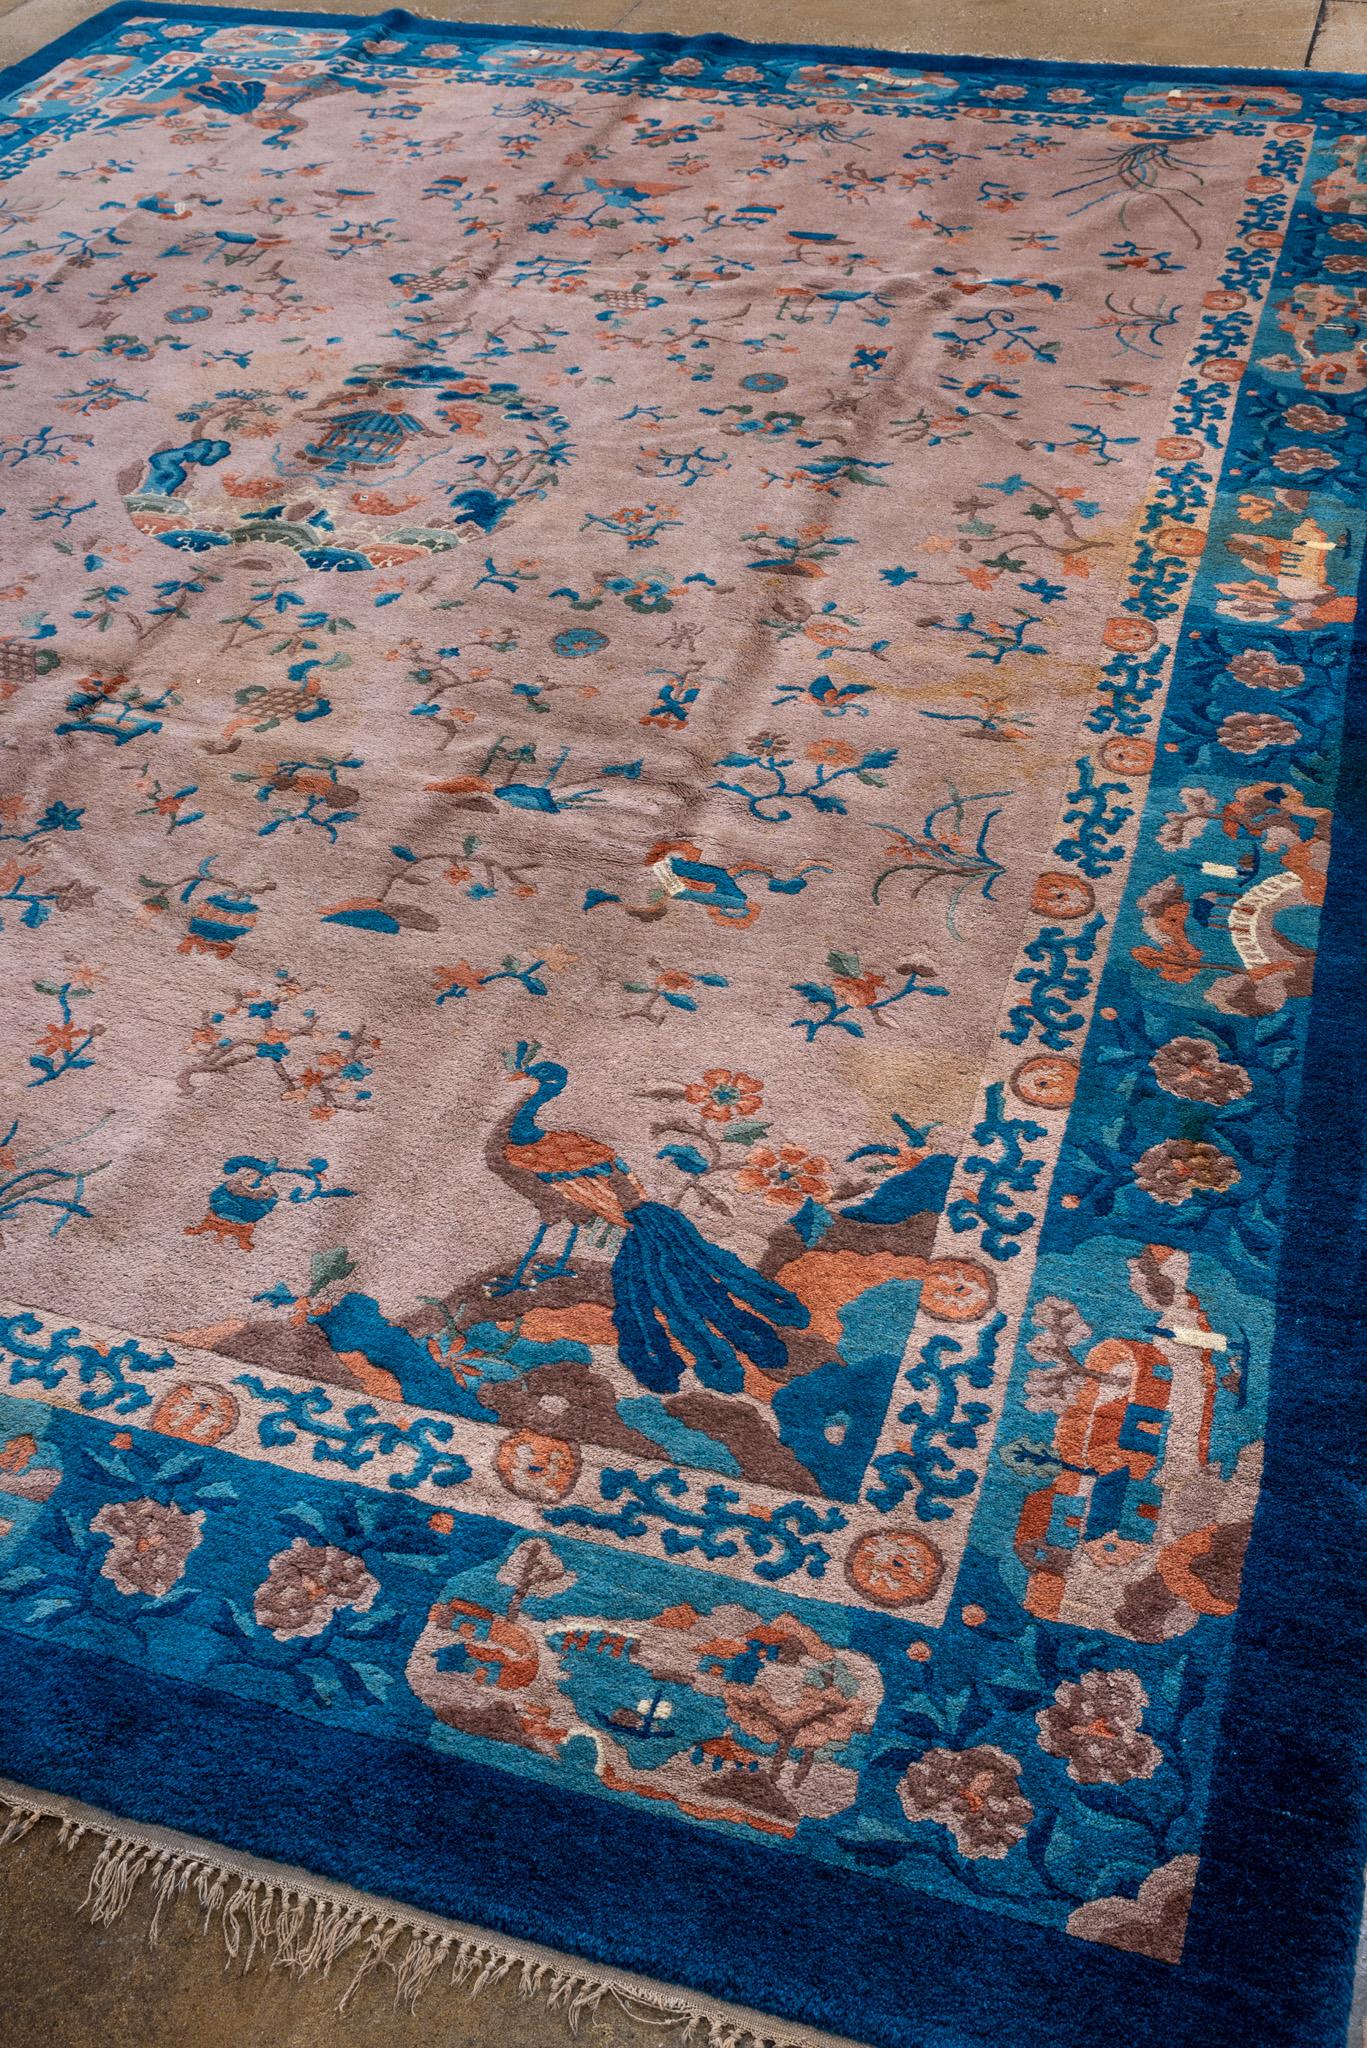 A Chinese Deco Rug circa 1930. Hand knotted. Made of 100% Wool yarn. 